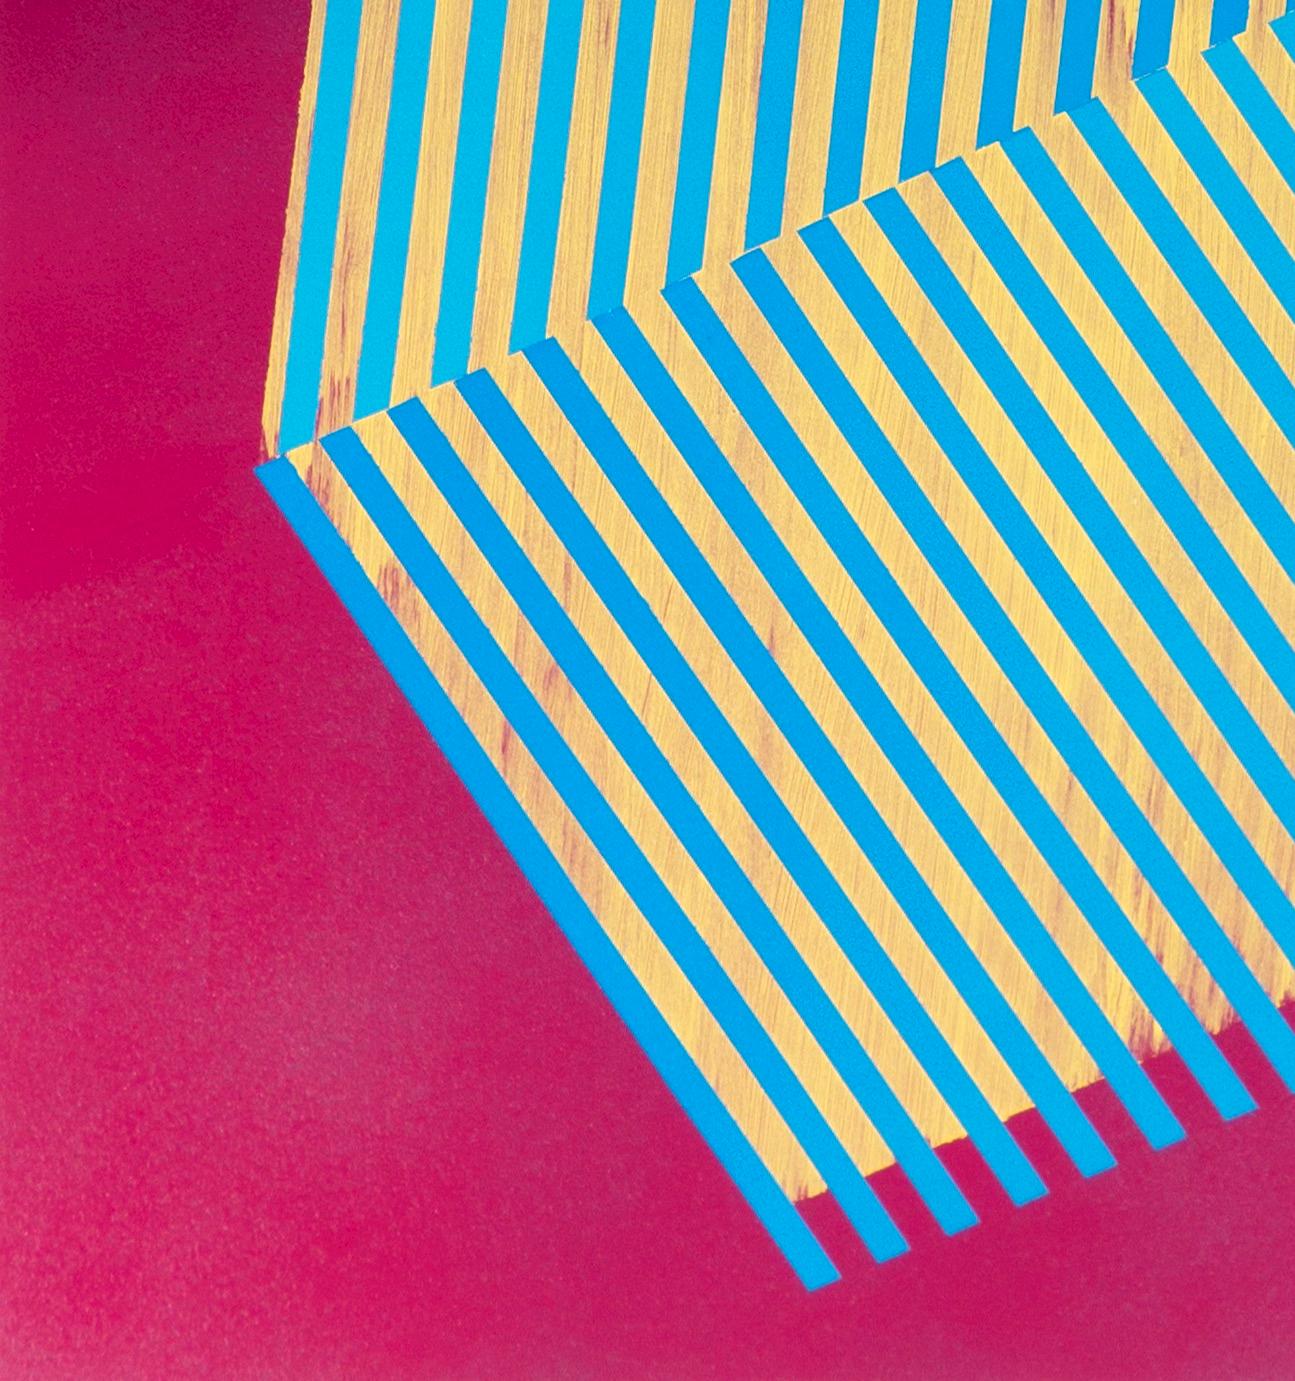 Prismatic Polygon IV: geometric abstract painting in pink, blue, yellow patterns - Painting by Jay Walker